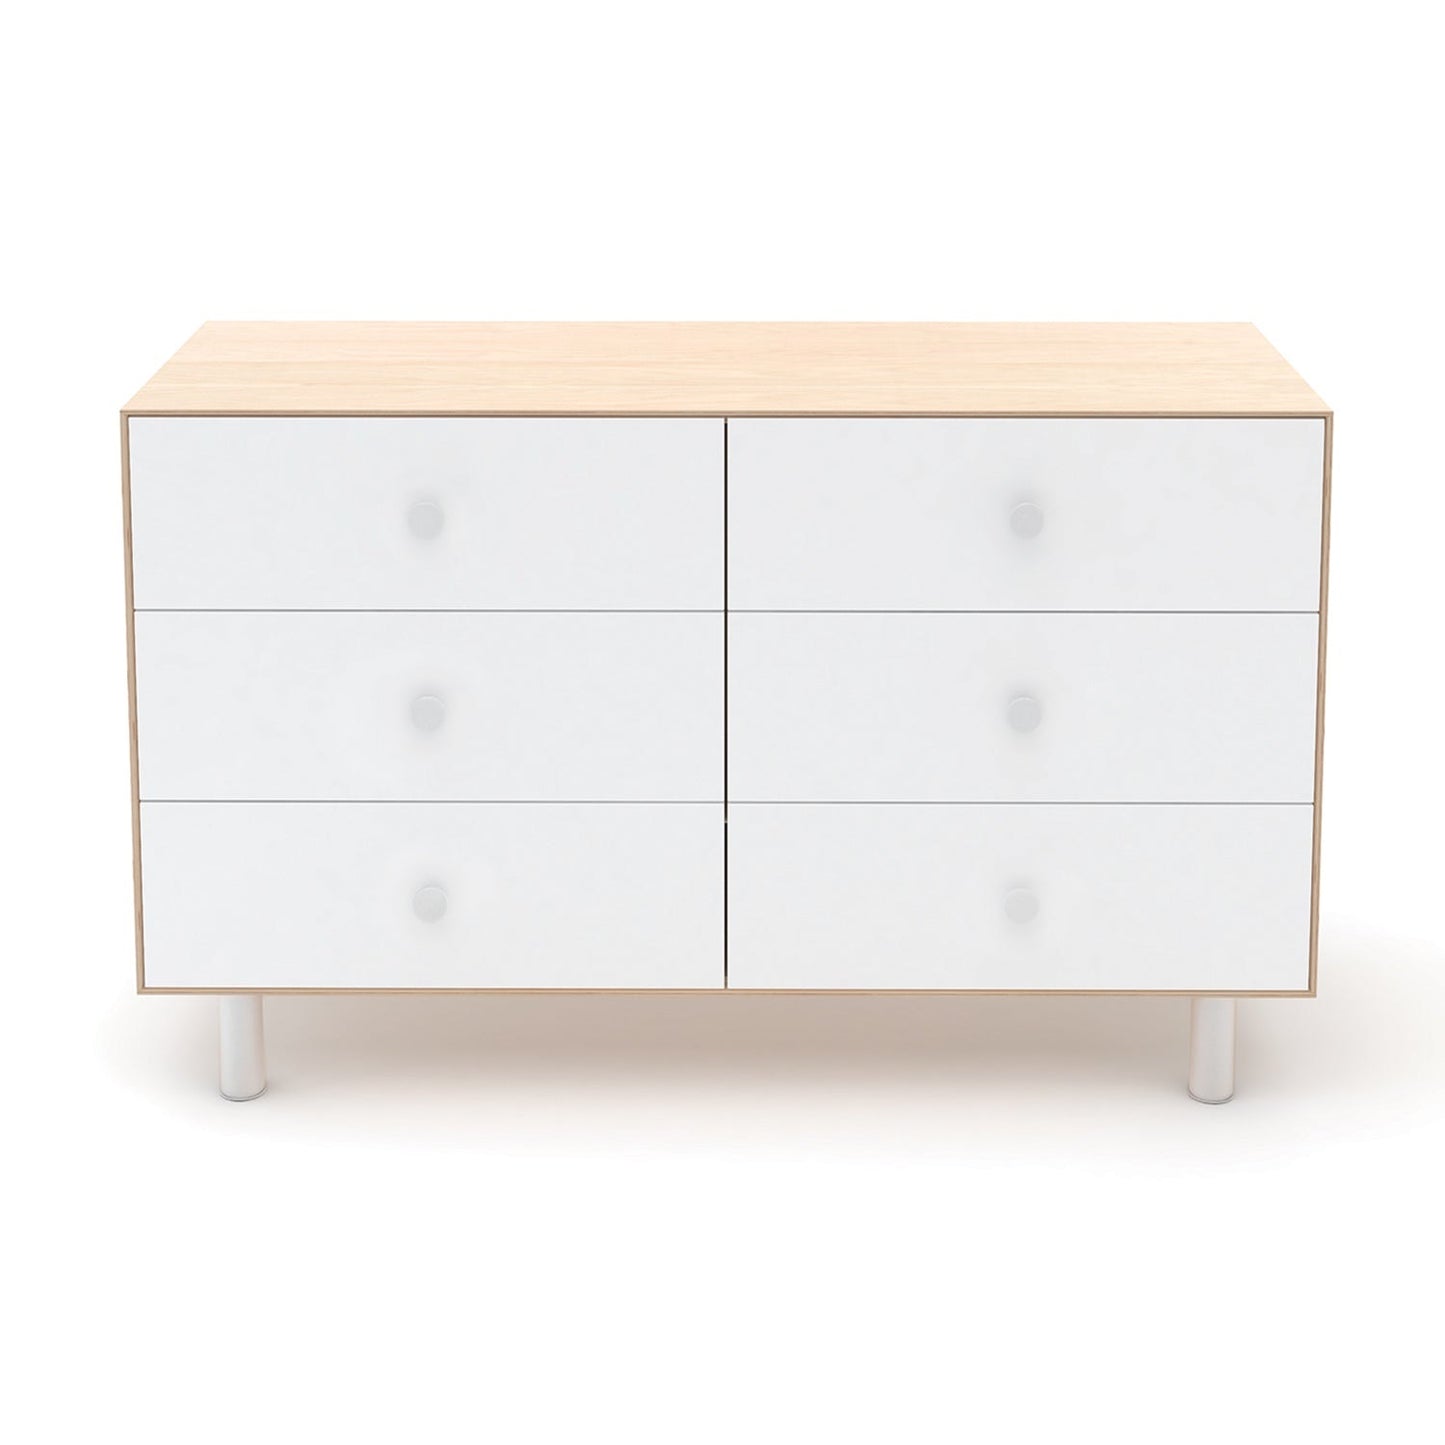 Oeuf NYC Merlin 6 Drawer Dresser - Classic Legs (3 Colours Available)